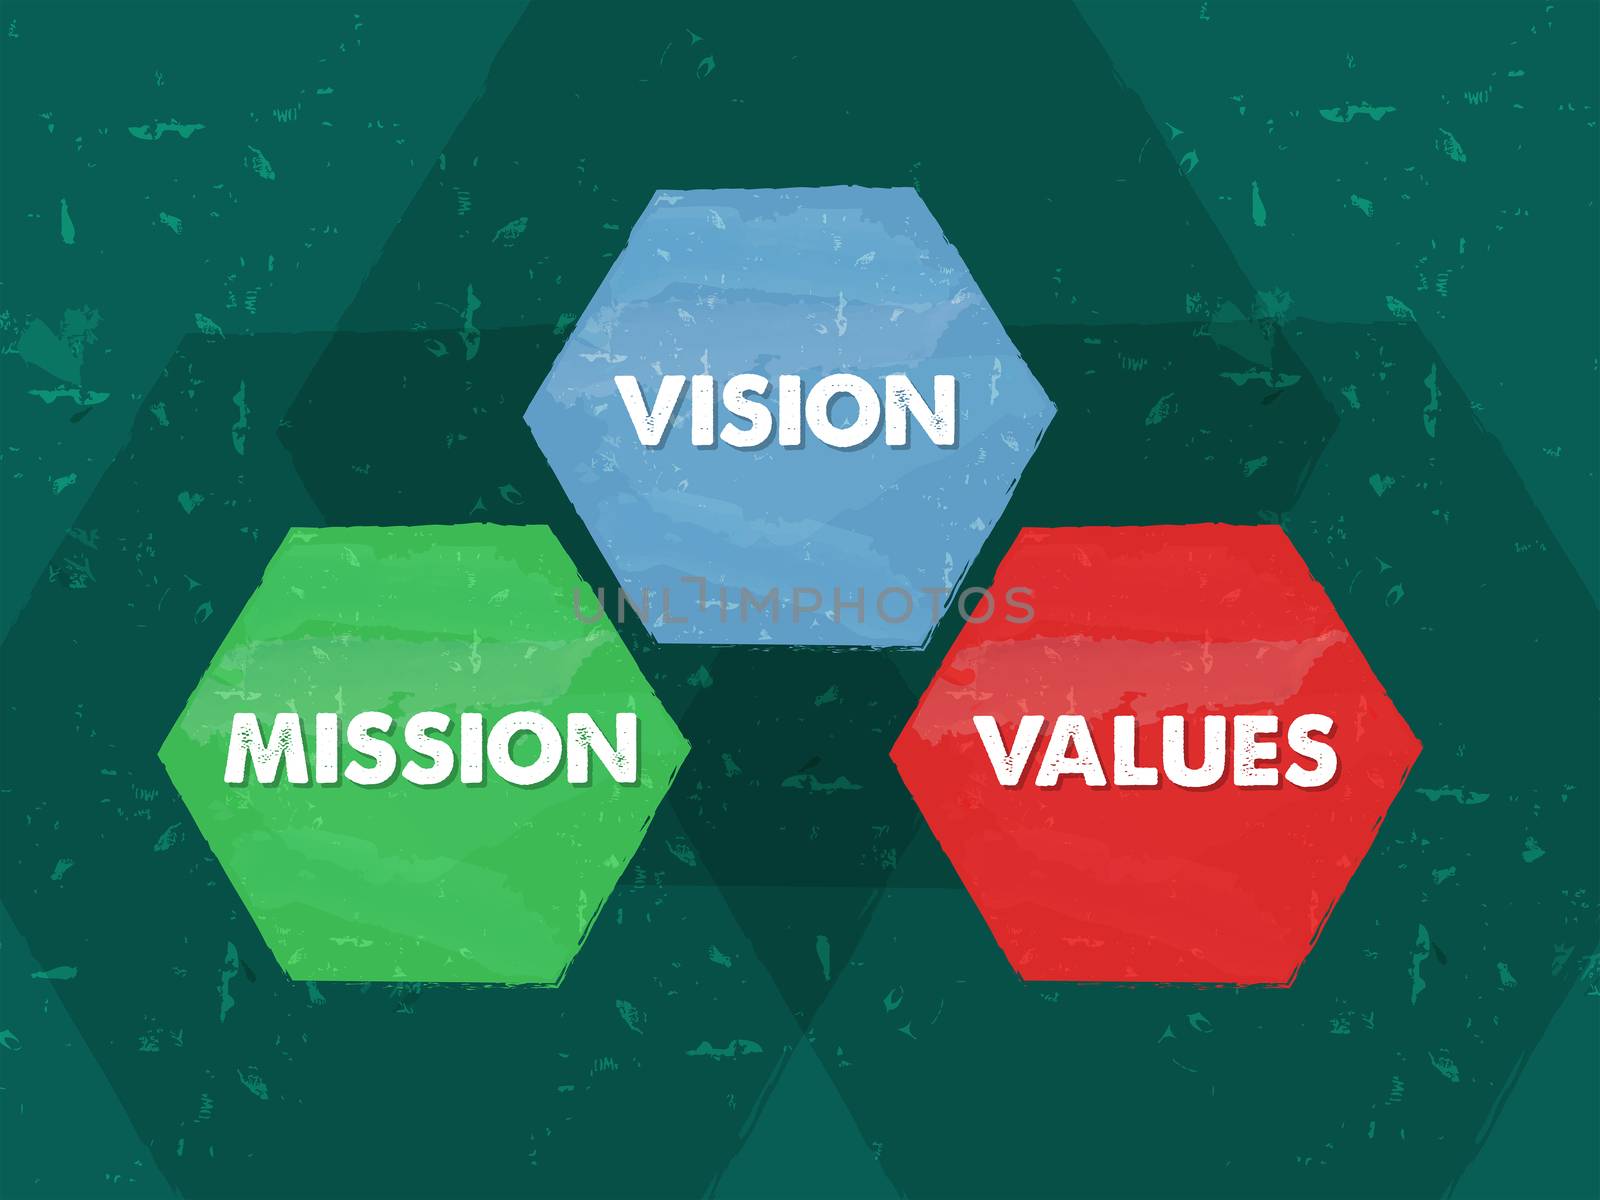 mission, values, vision - white text in colorful grunge flat design hexagons, business cultural riches concept words